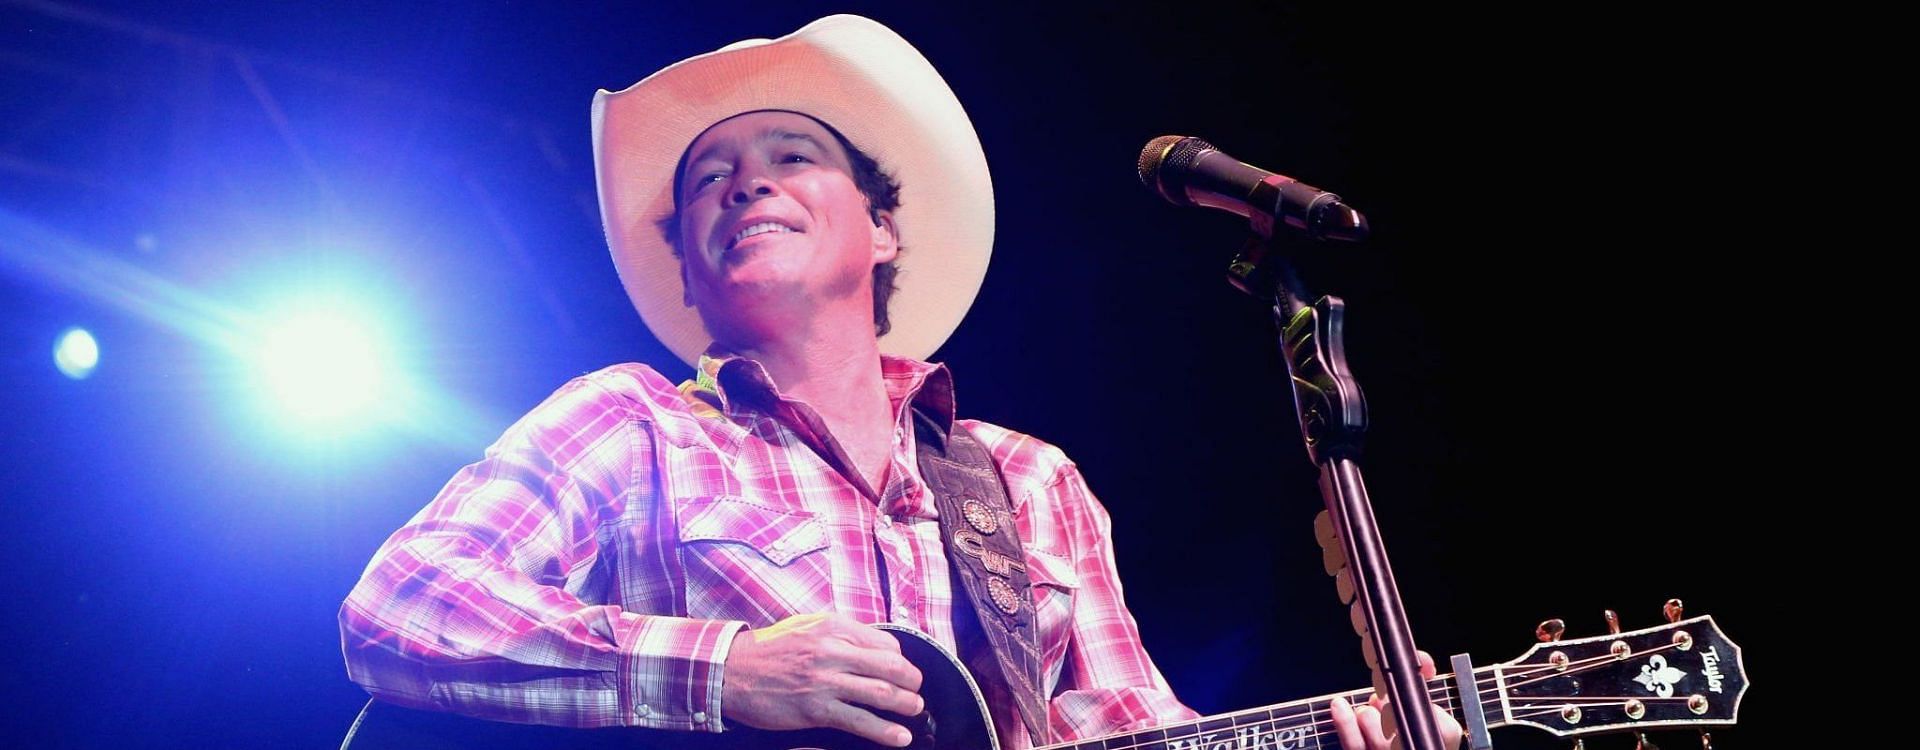 Social media users slammed Clay Walker over bus driver audio (Image via Getty Images)